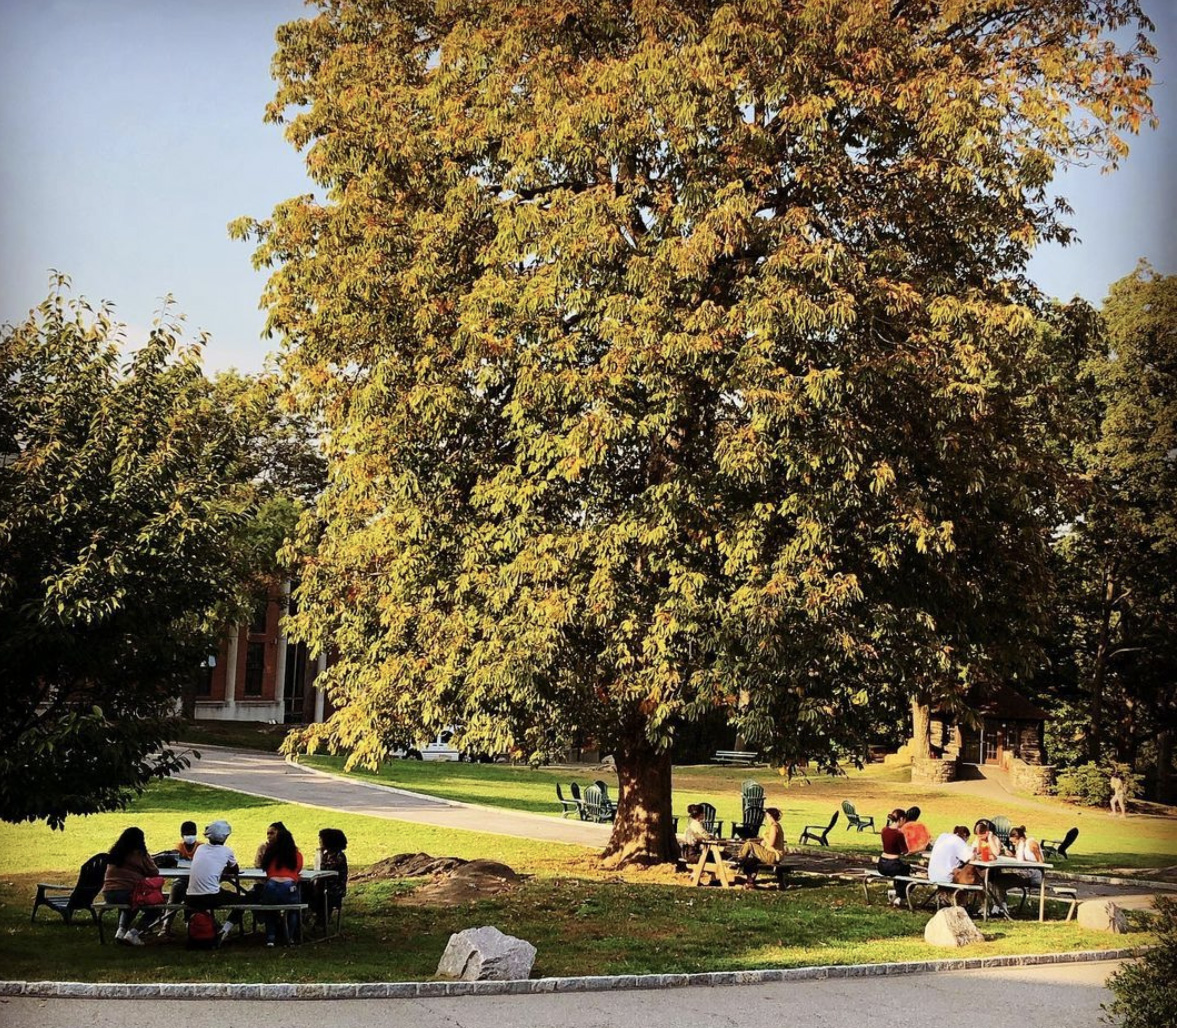 Students gathered outside on a fall day